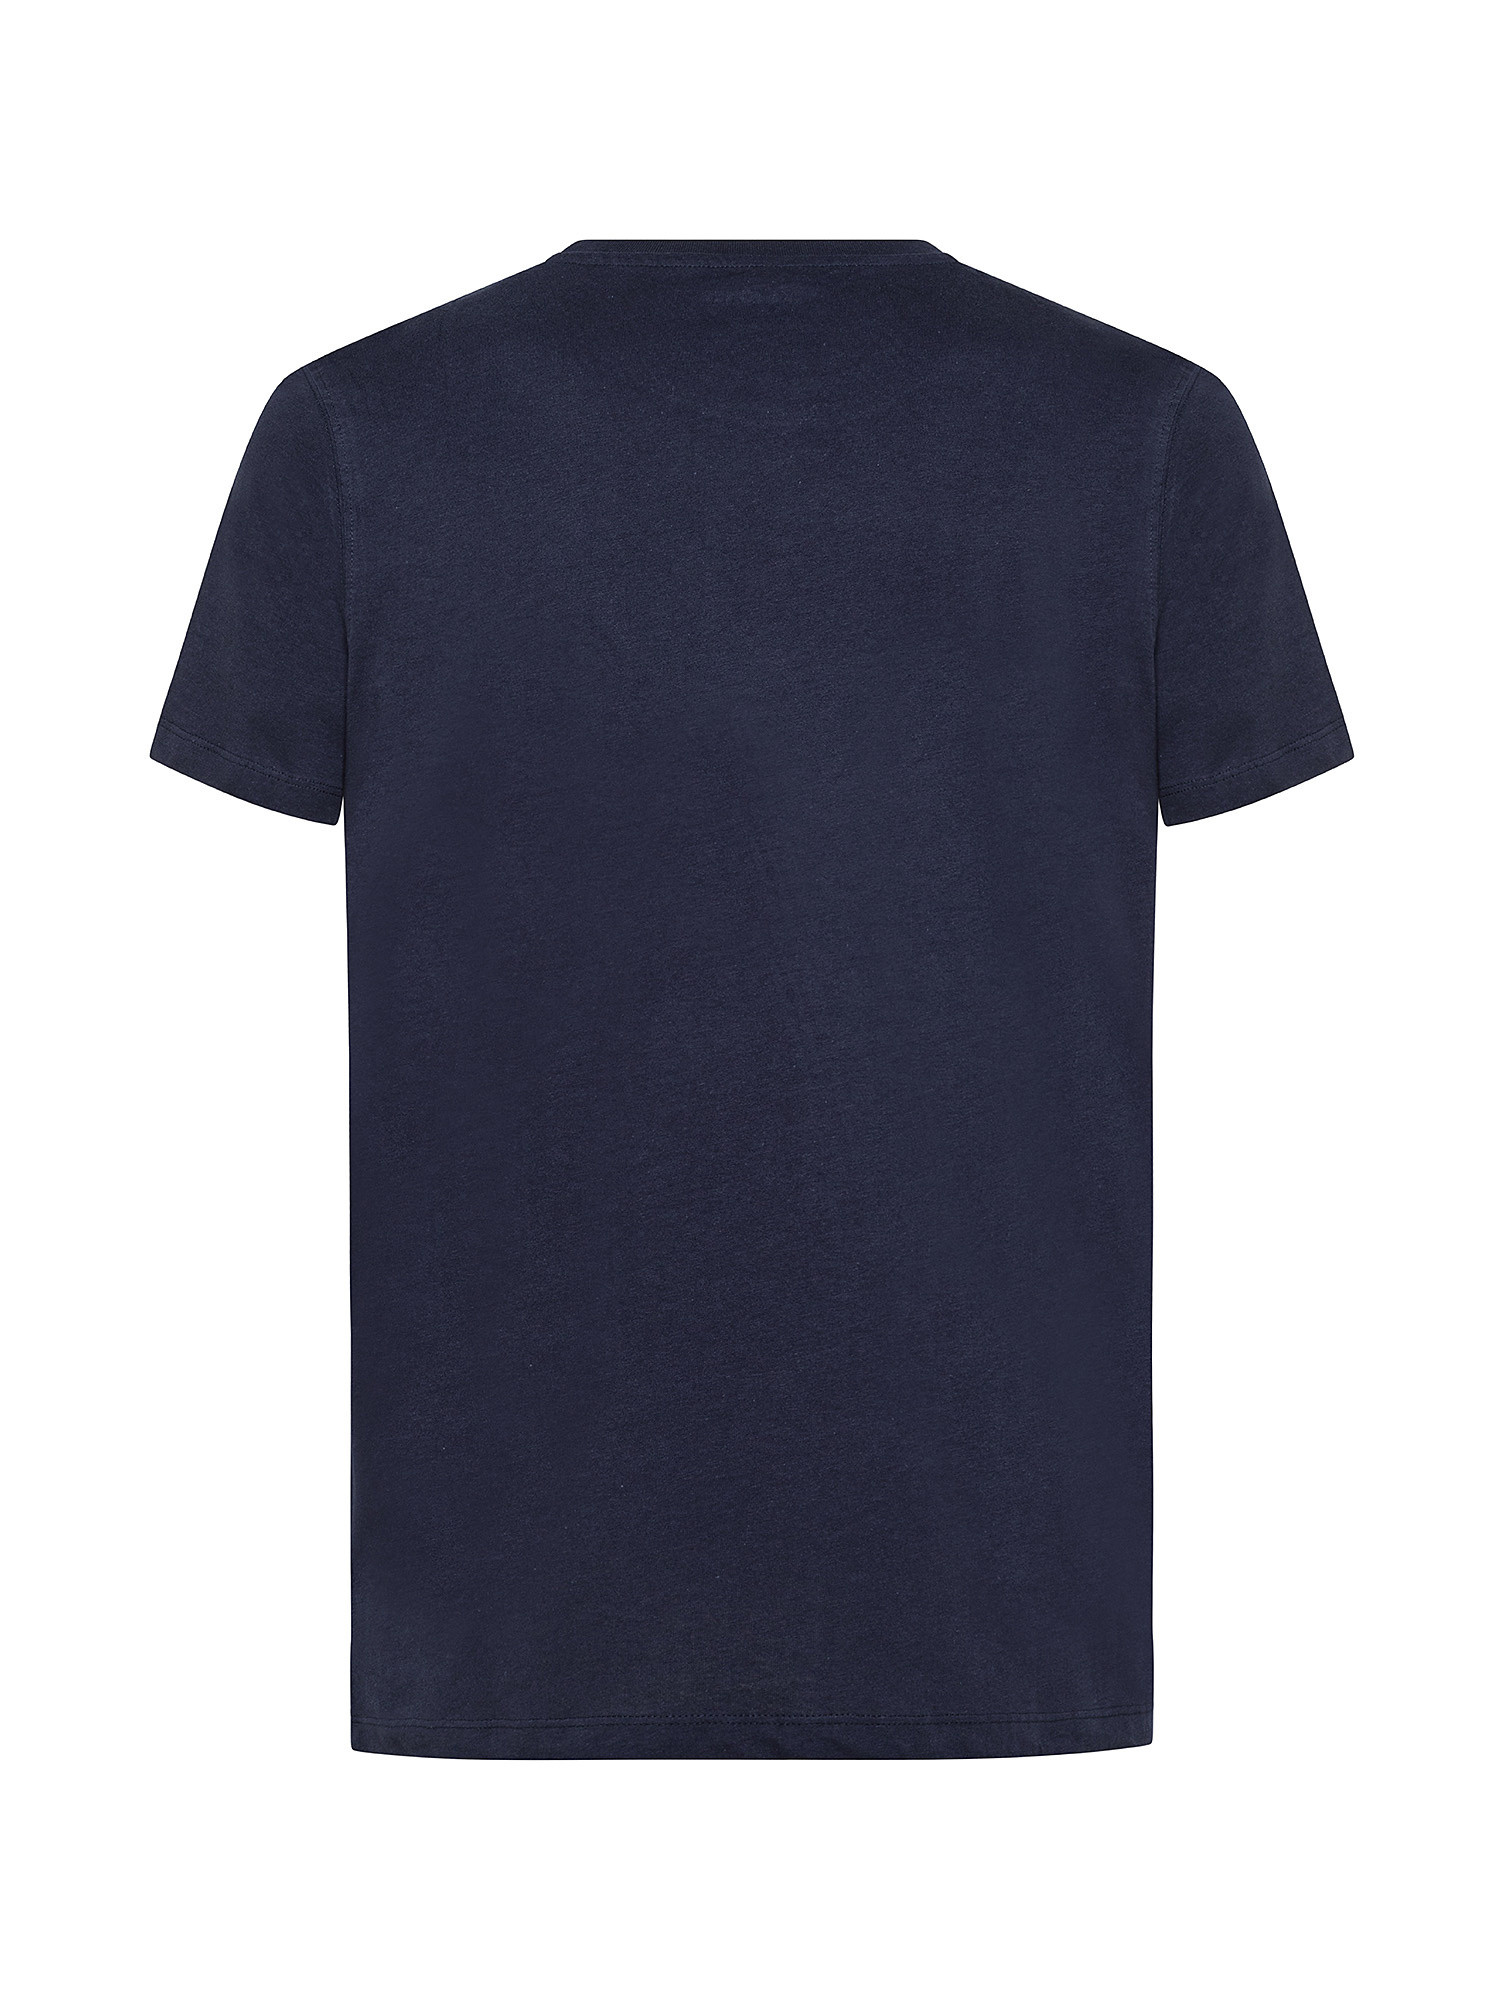 T-shirt with print, Dark Blue, large image number 1